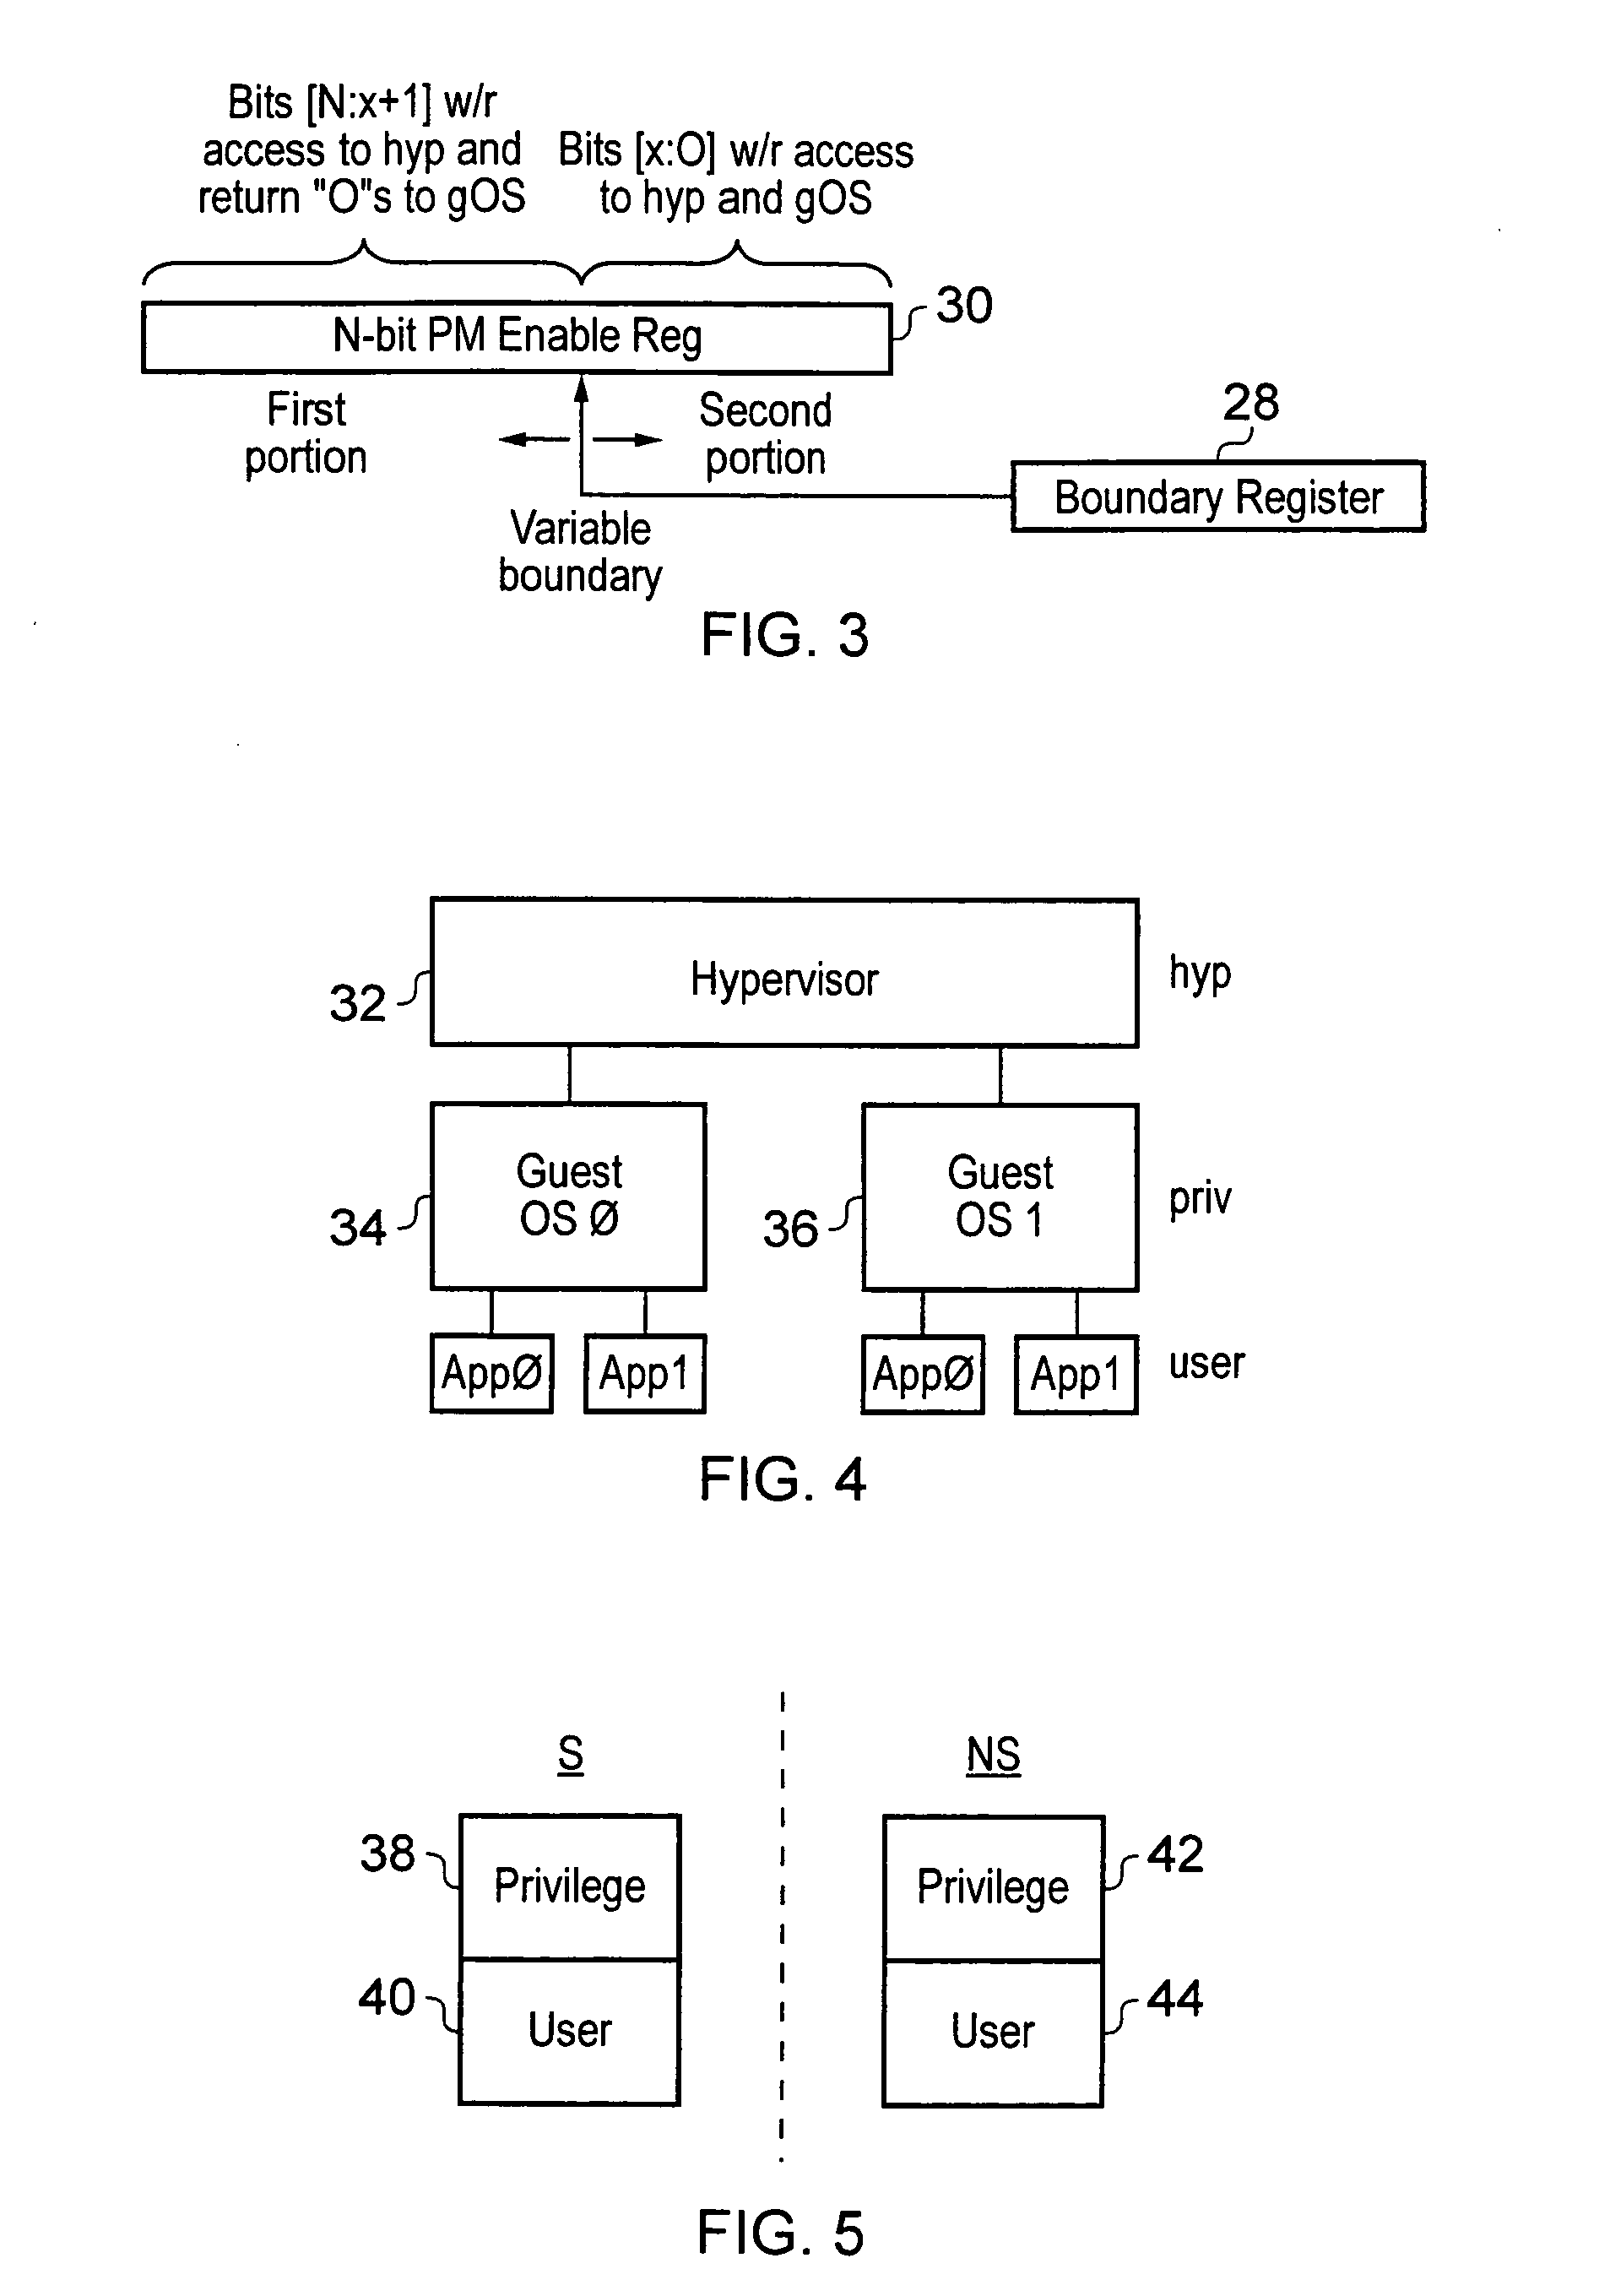 Hardware resource management within a data processing system